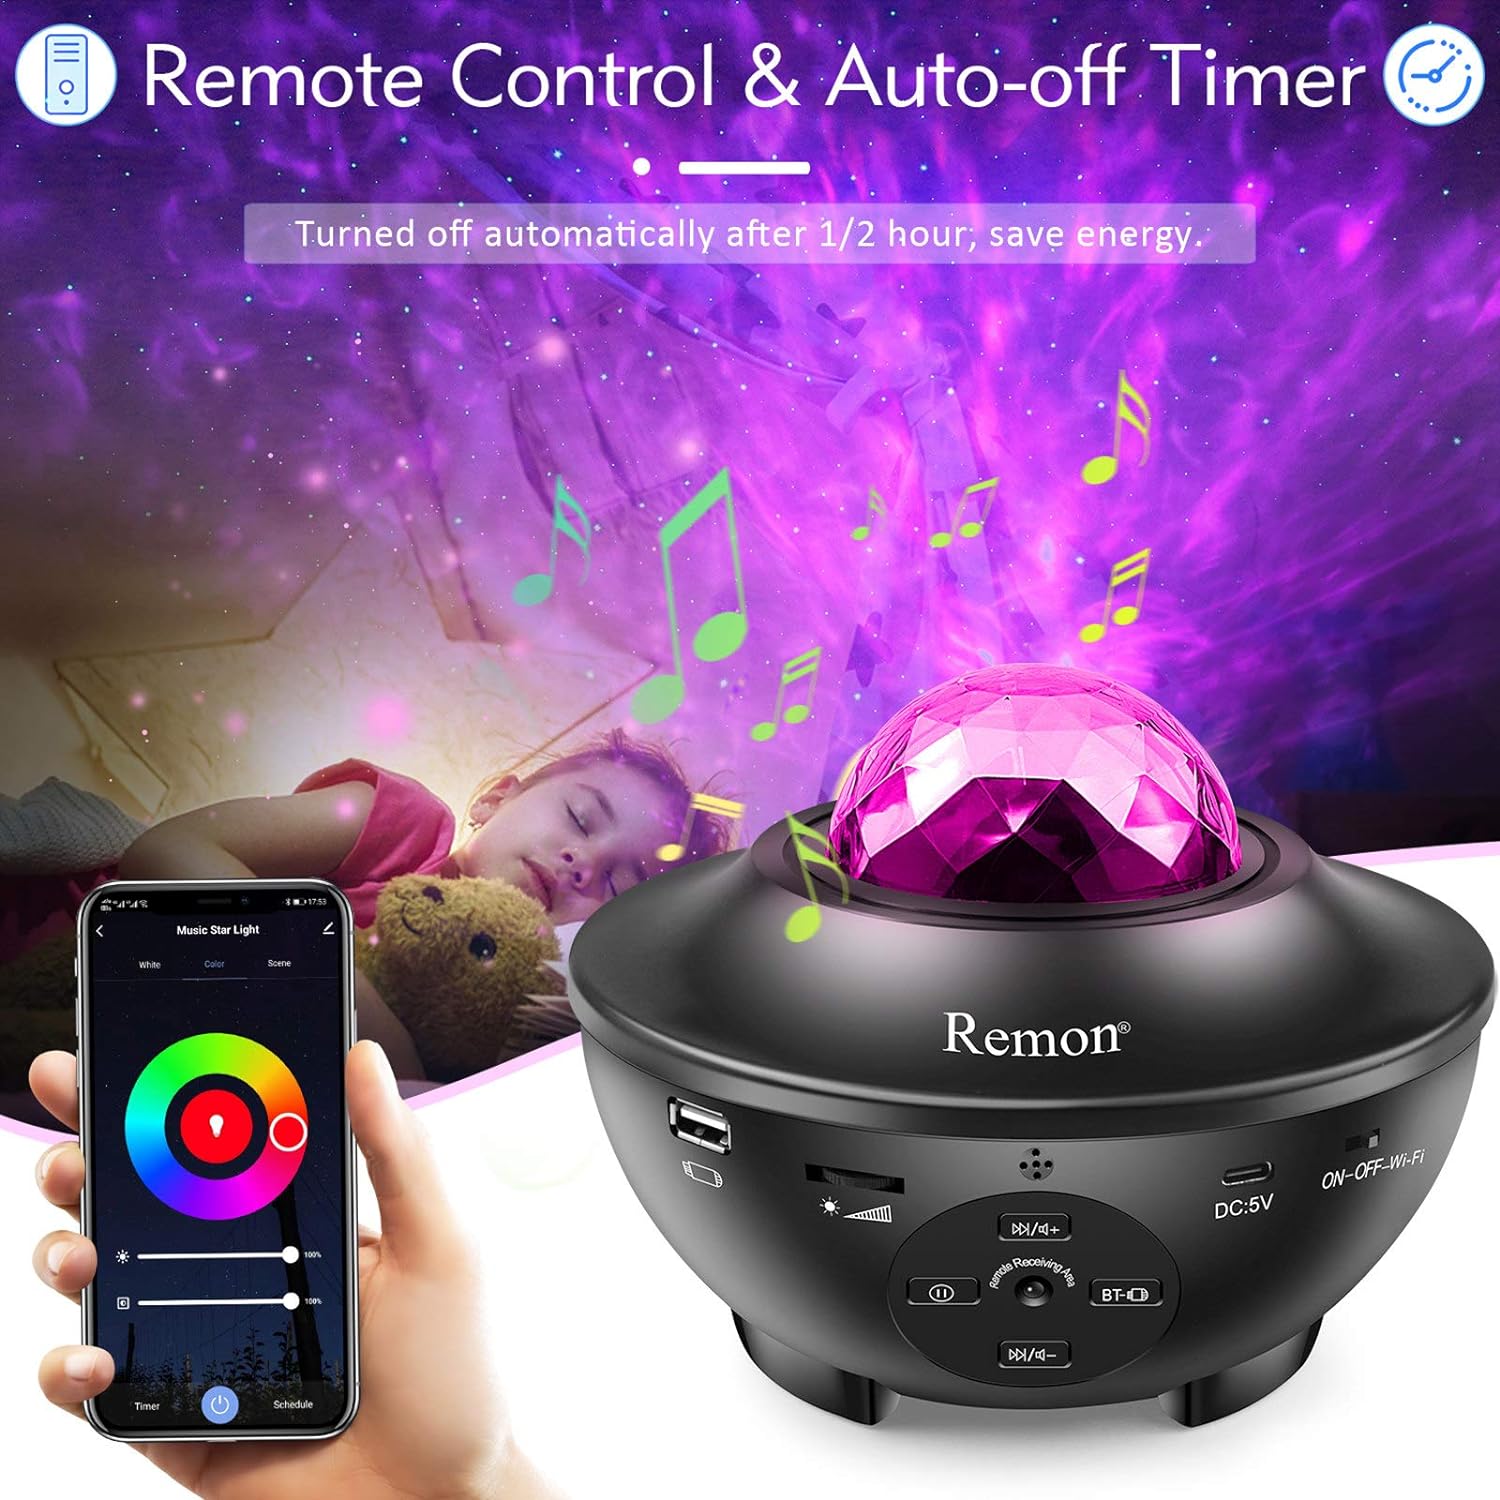 Remon Star Projector Galaxy Projector Smart Night Light with 10 Colors Ocean Wave and Starry Scene Works with Alexa and Google Home, Valentine Gift Bluetooth Music Speaker for Kids Bedroom